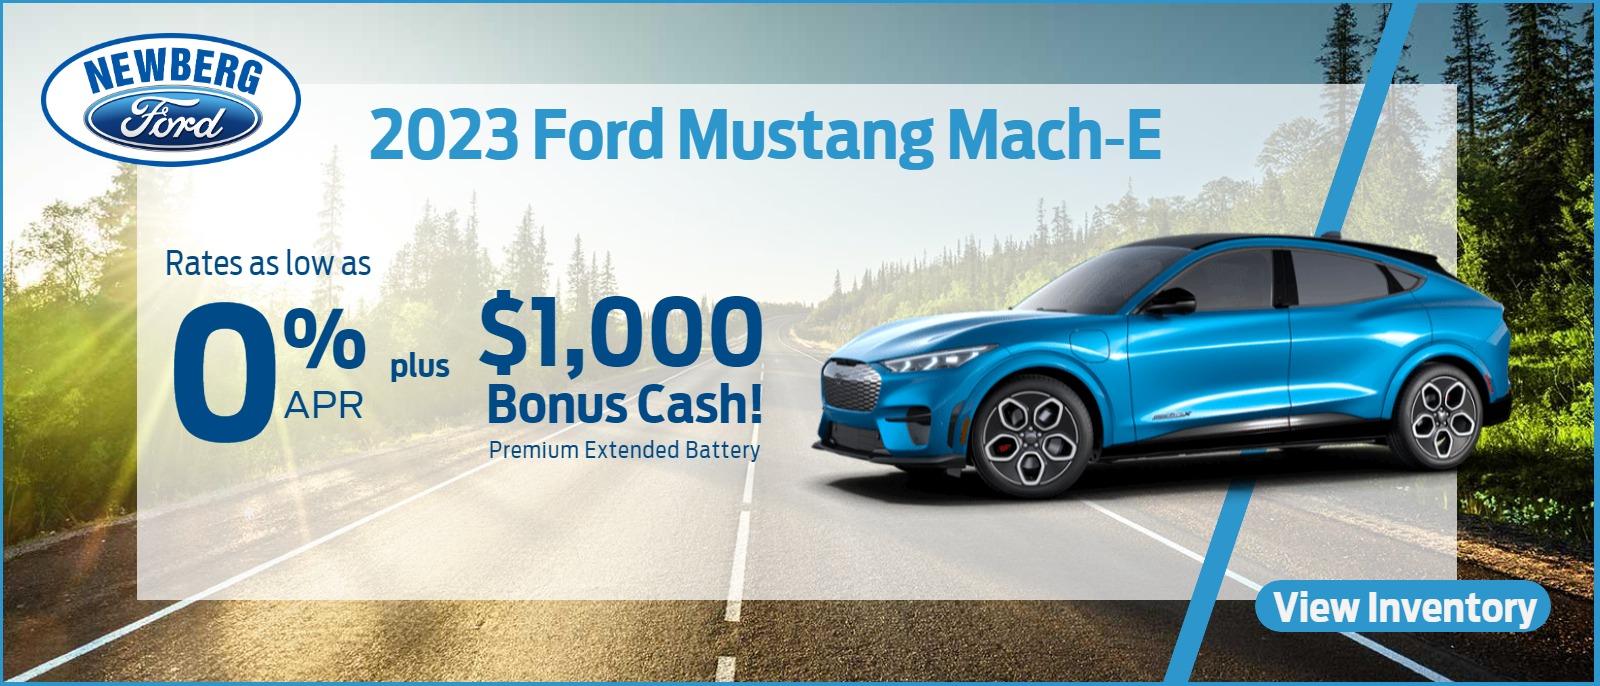 0% APR FOR UP TO 72 MONTHS PLUS $1,000 RETAIL BONUS CASH ON NEW 2023 MUSTANG MACH-E FROM NEWBERG FORD